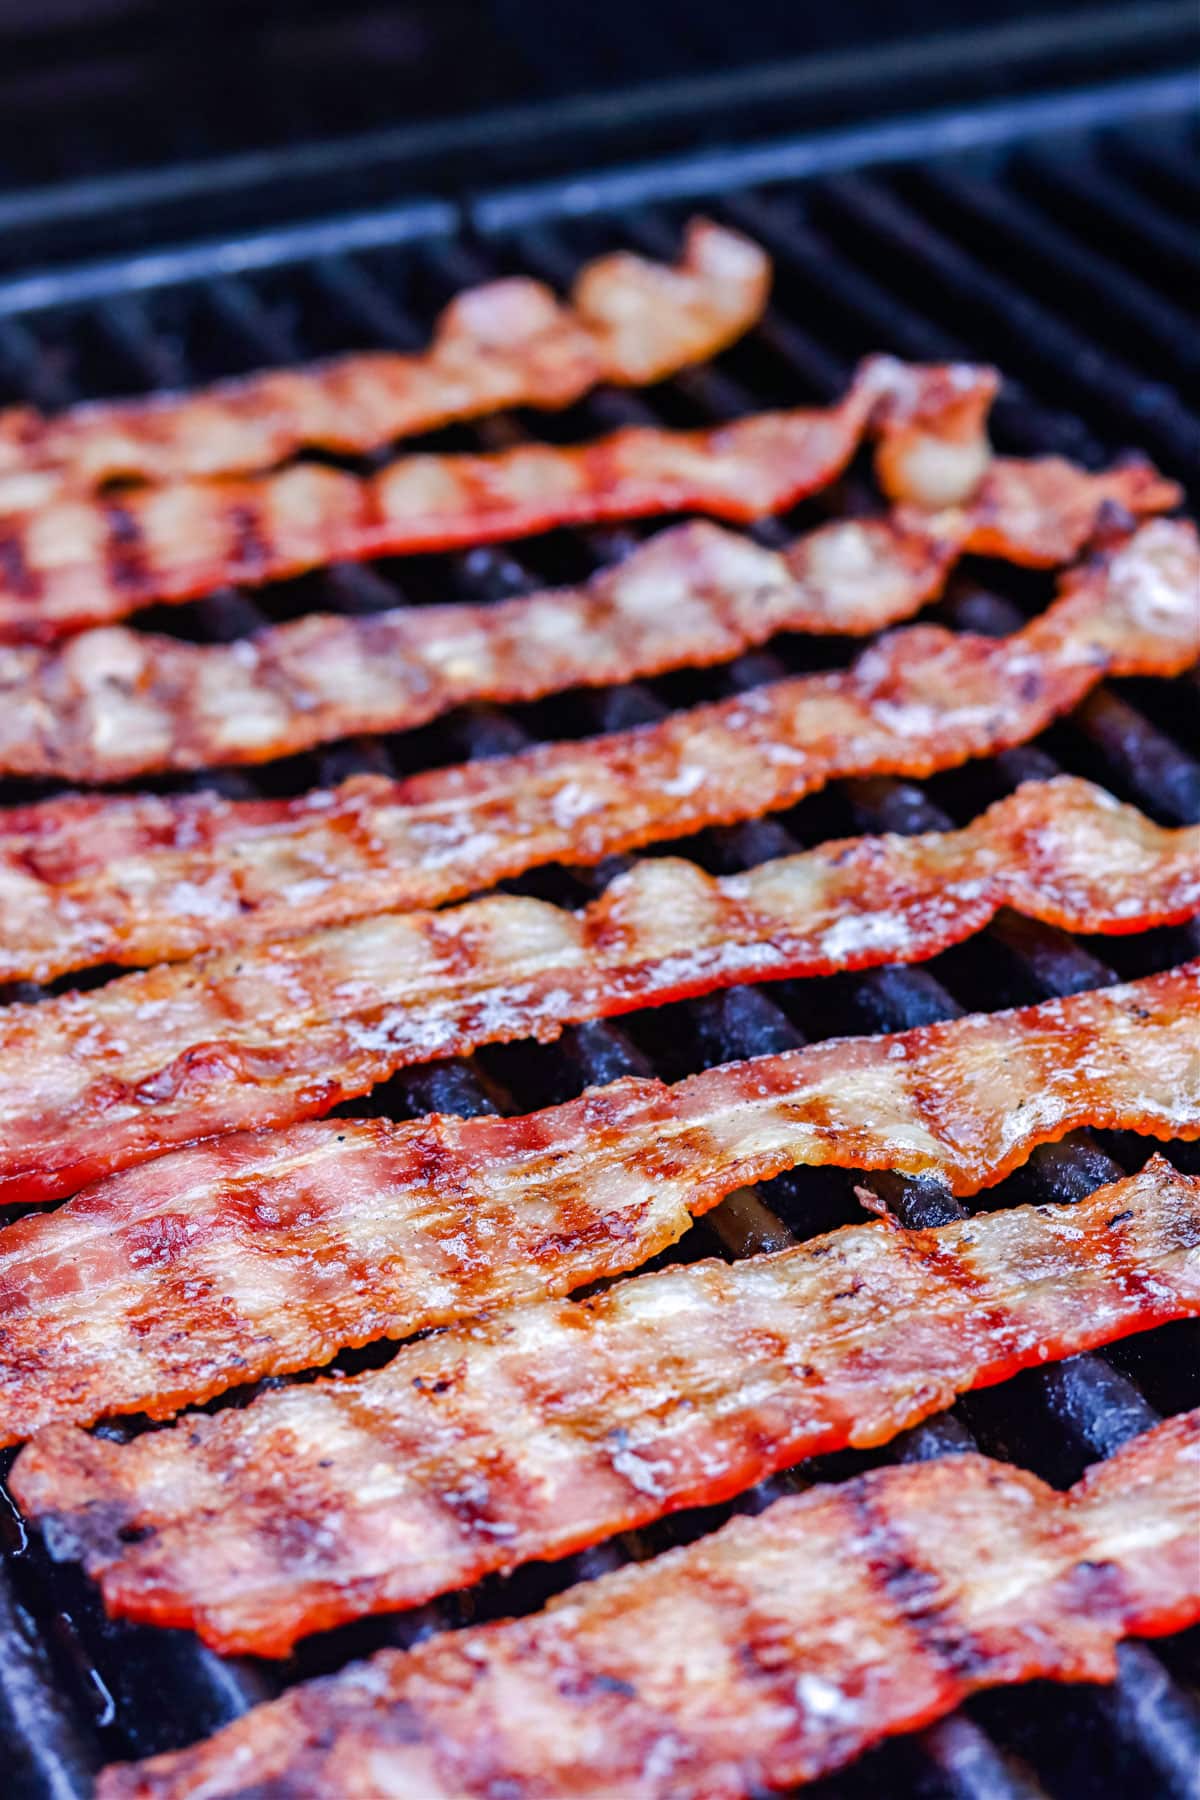 Bacon on the grill with grill marks on the bacon.